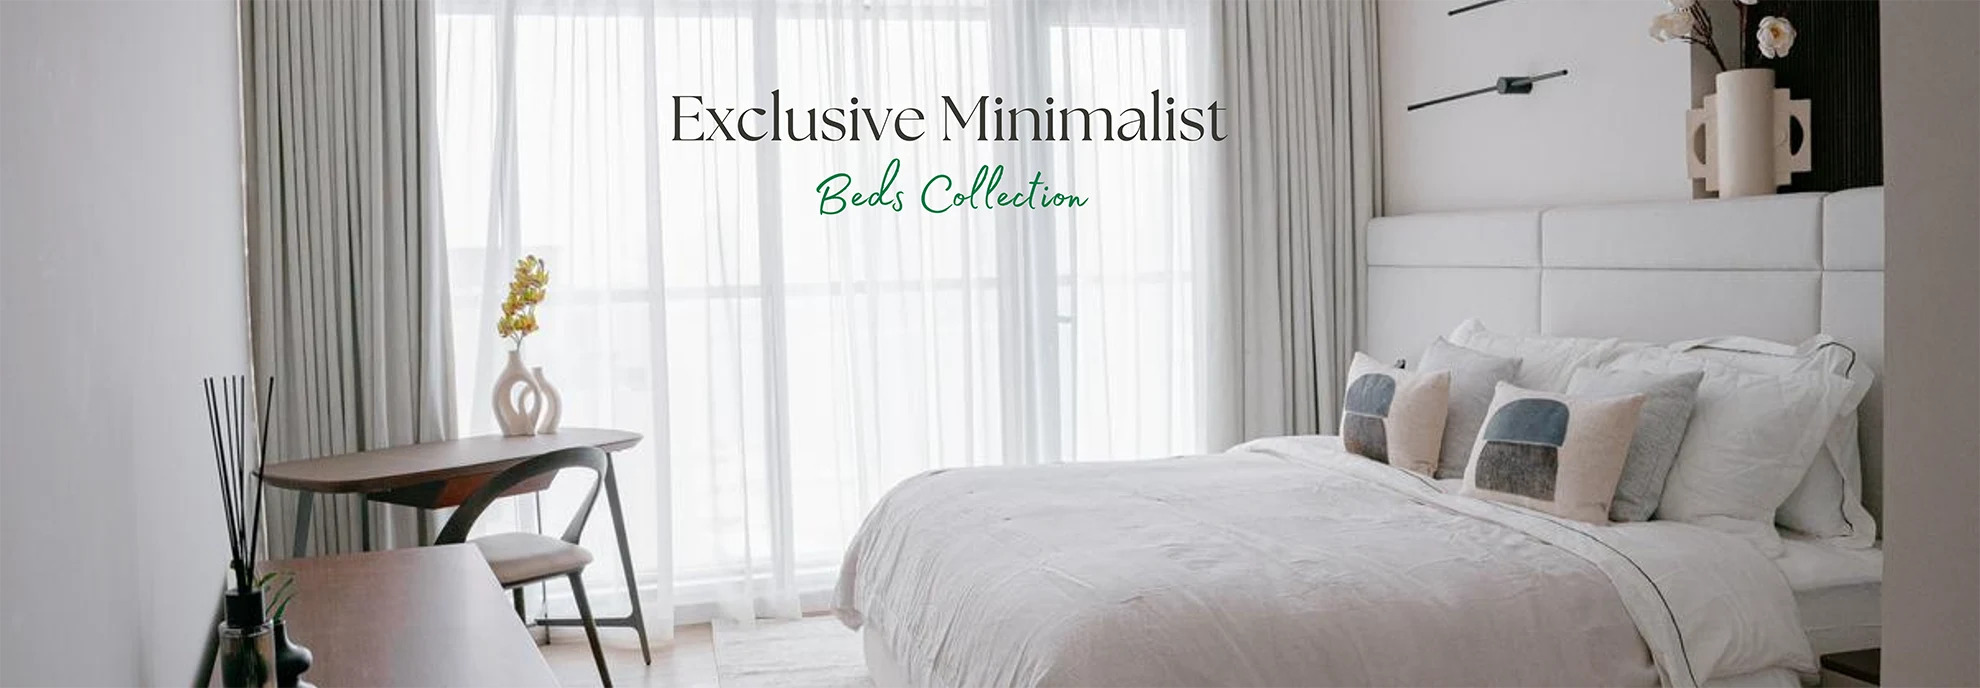 Bed Collection Banner